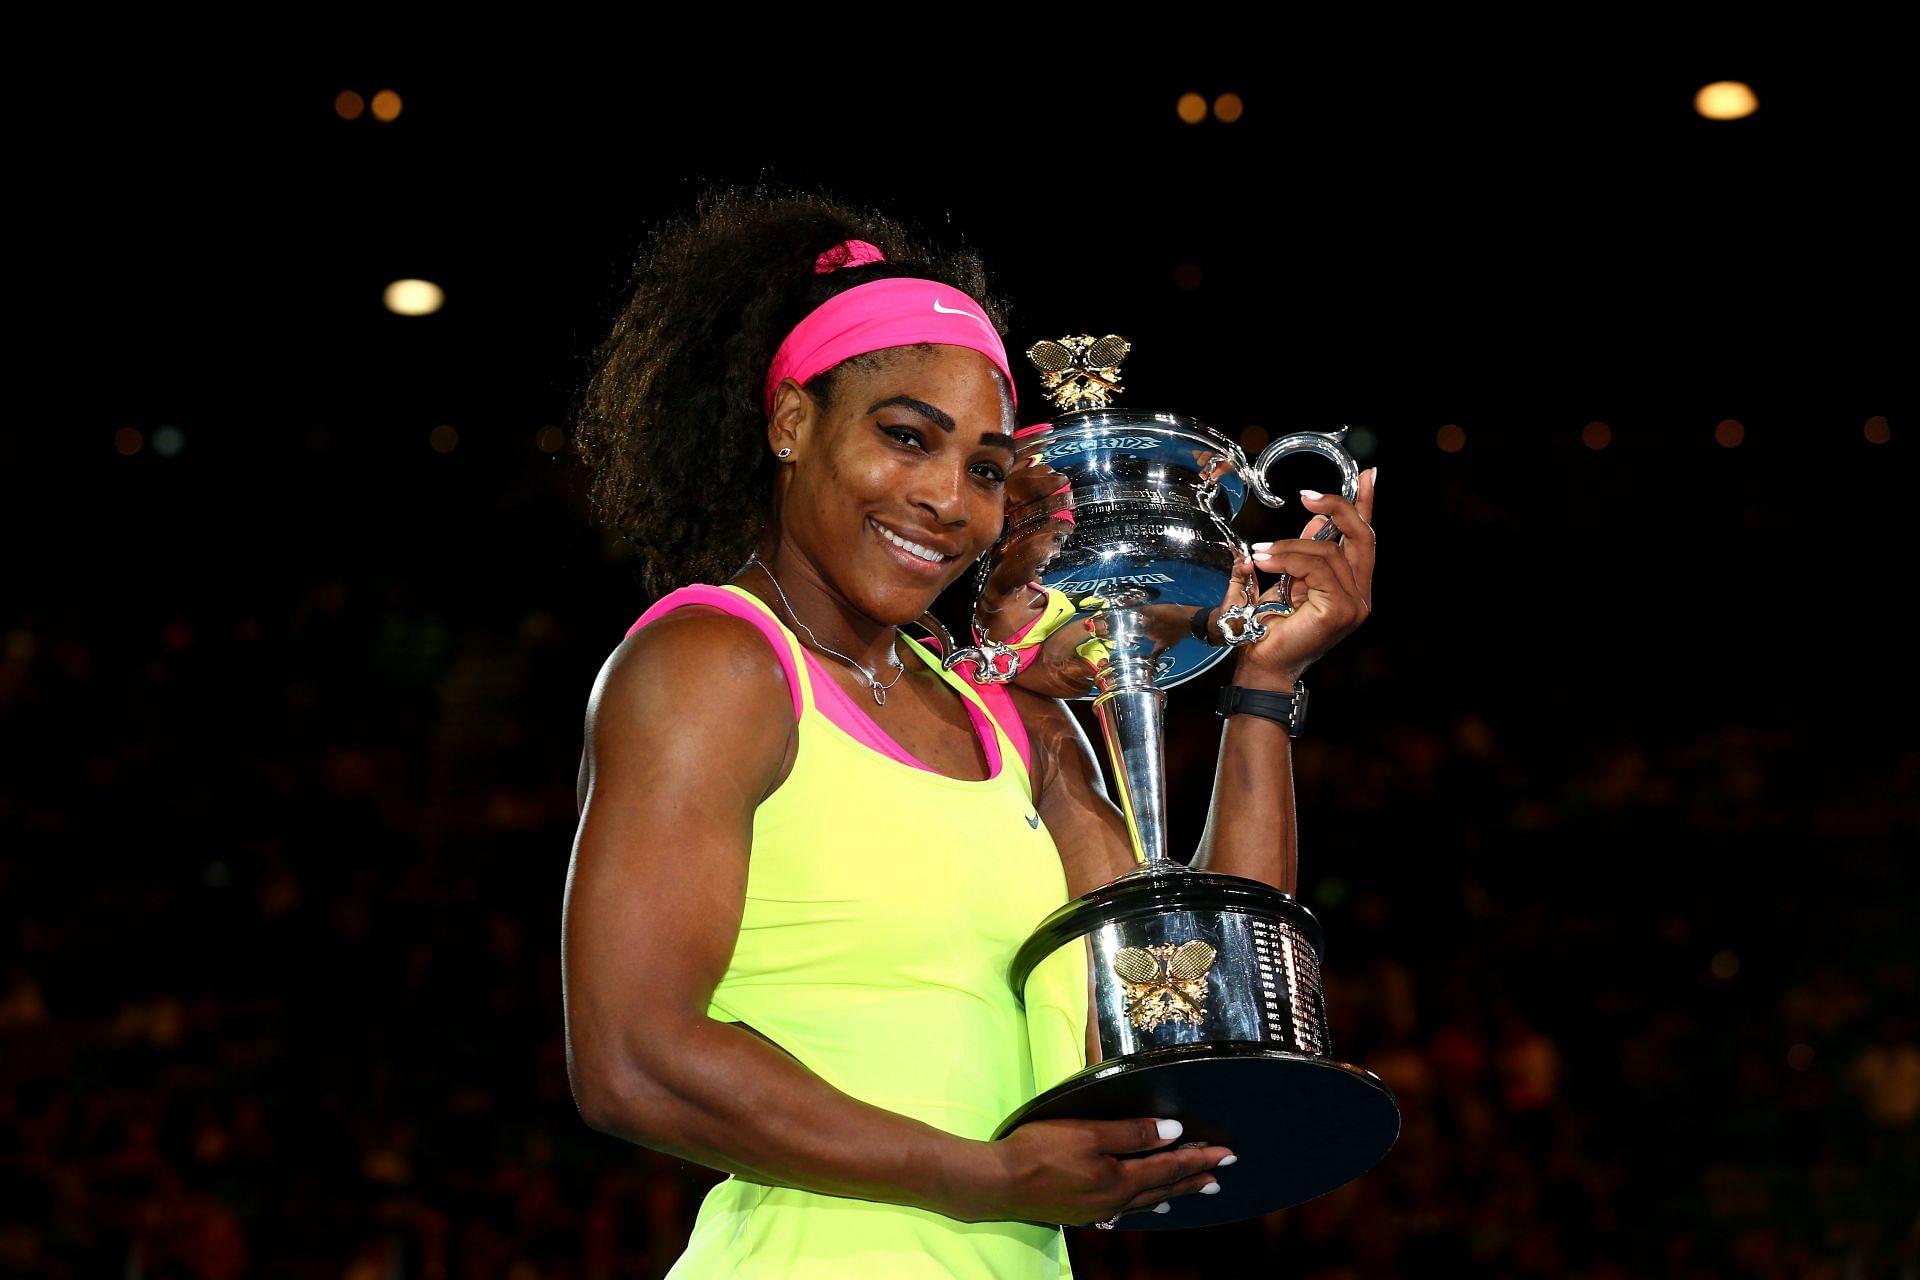 Serena Williams will be ready to do whatever it takes to win one more Grand Slam title